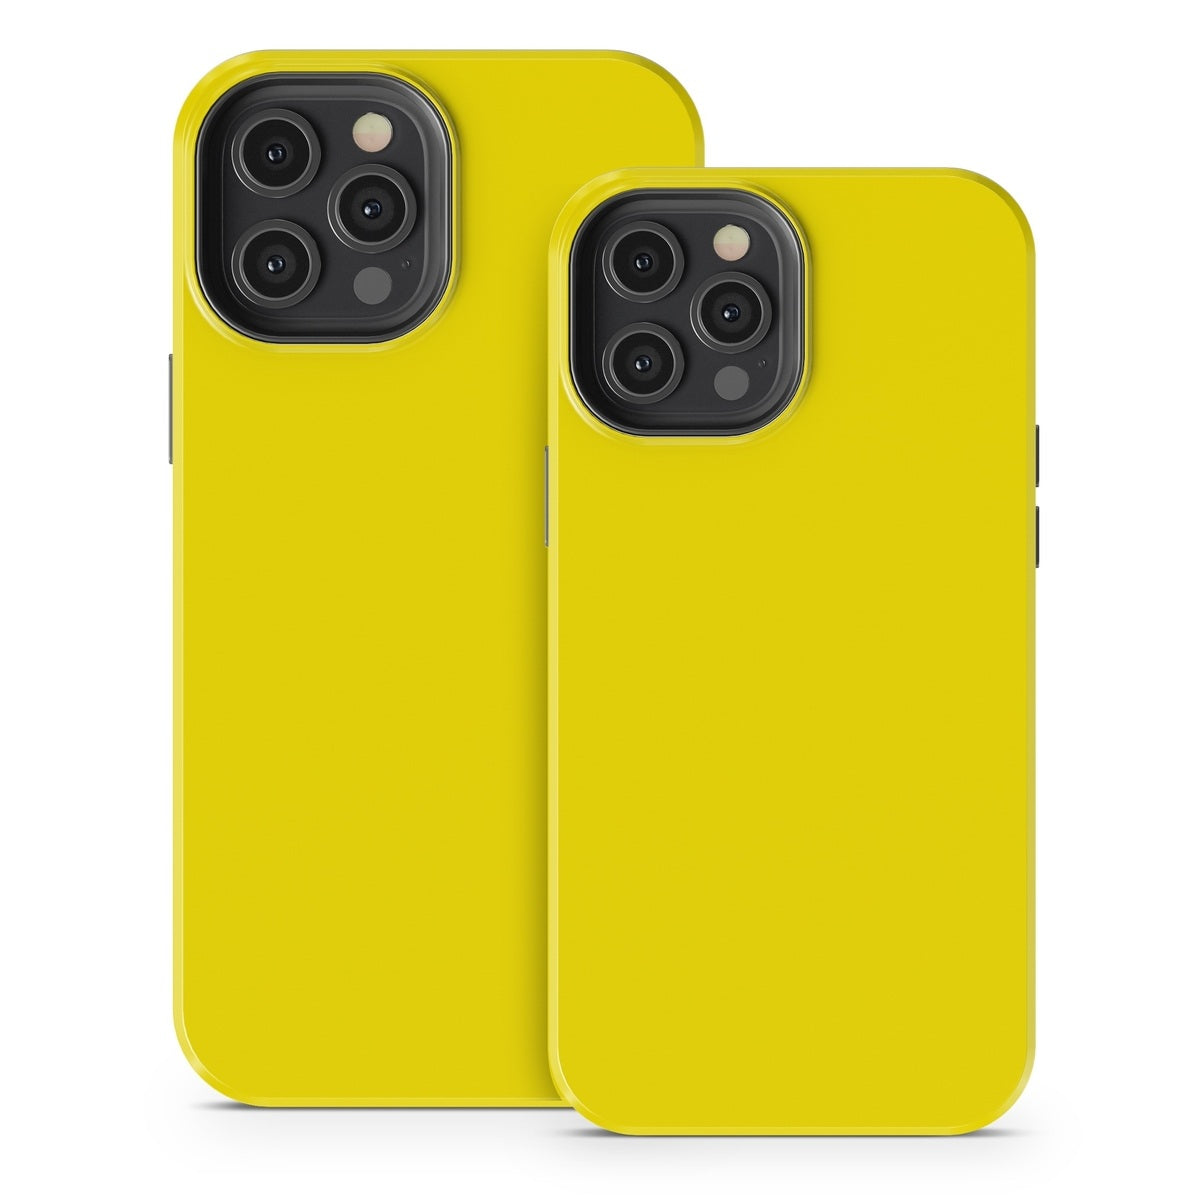 Solid State Yellow - Apple iPhone 12 Tough Case